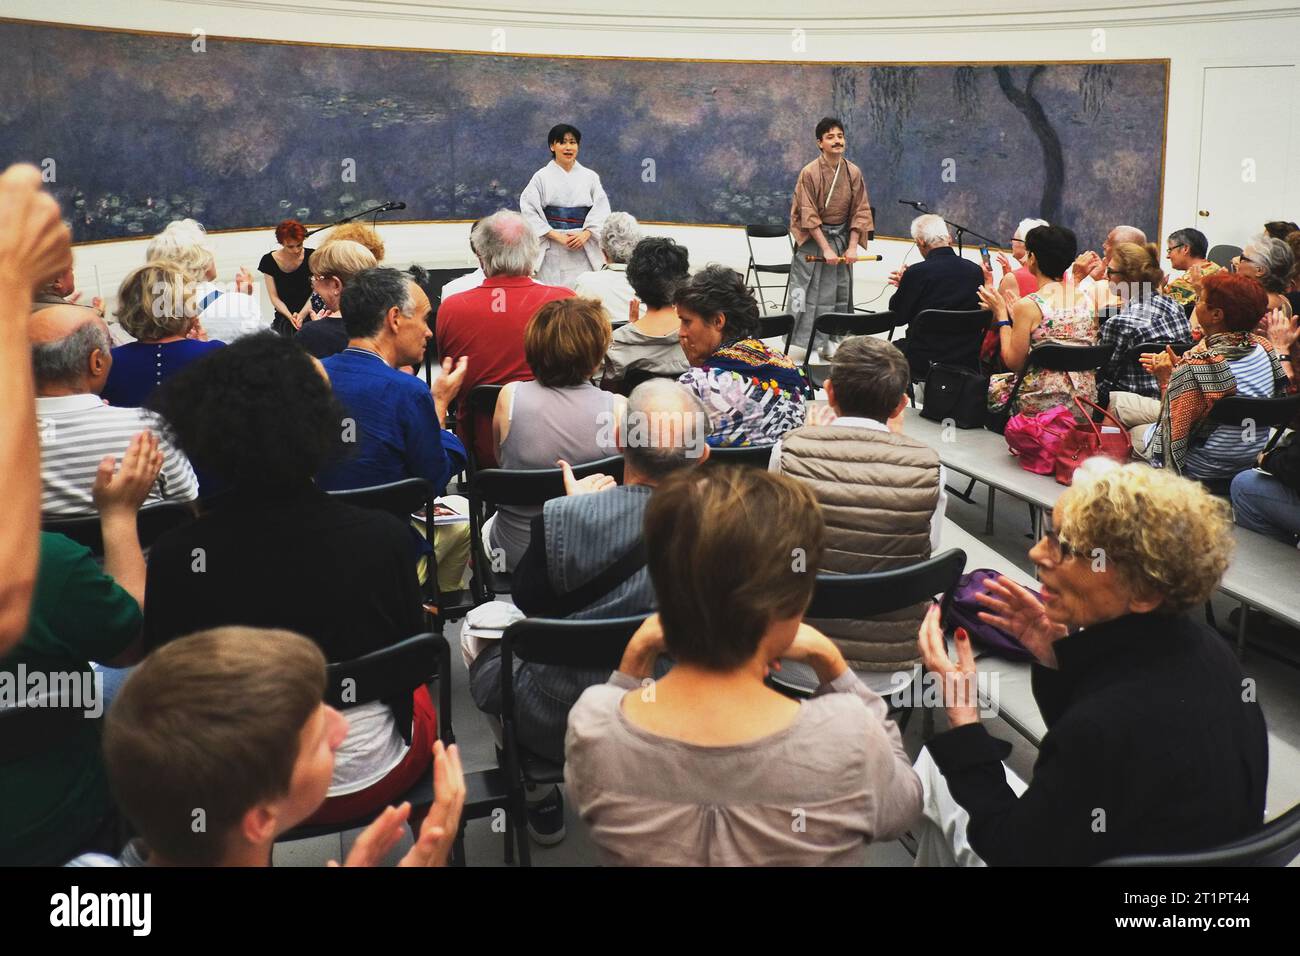 After the concert music, a music recital in Paris at the Musée de l'Orangerie with waterlily paintings by Monet, performers taking a bow audience Stock Photo